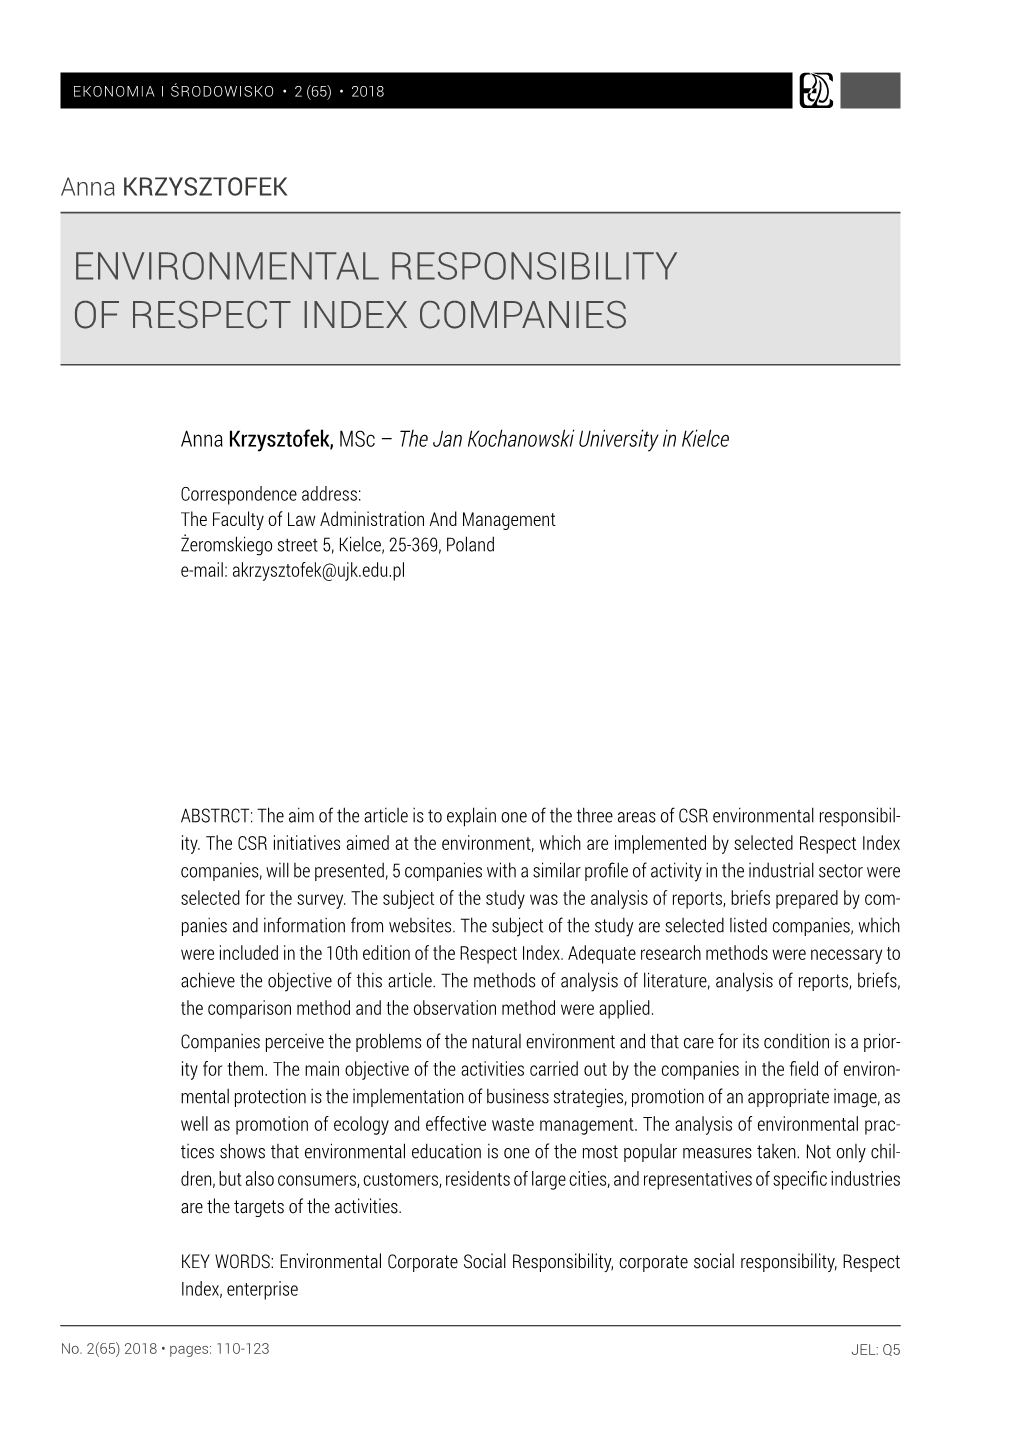 Environmental Responsibility of Respect Index Companies